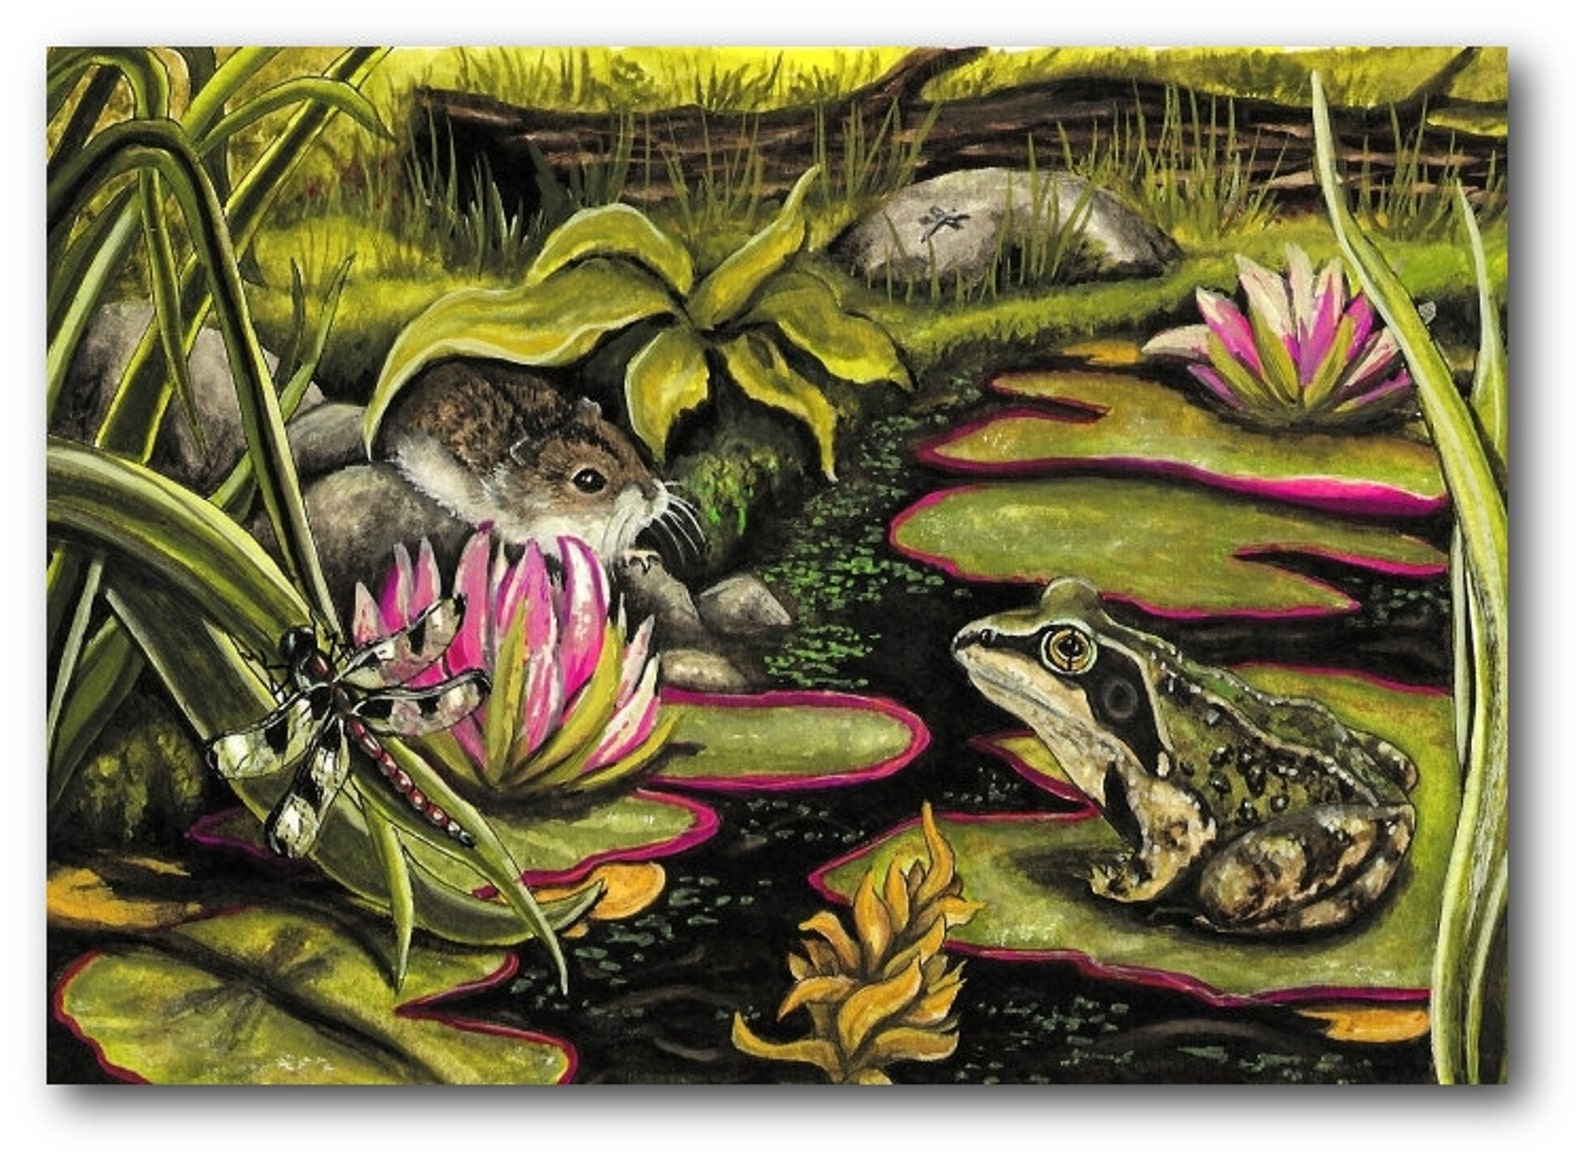 Home wildlife. Frog Pond Painting.